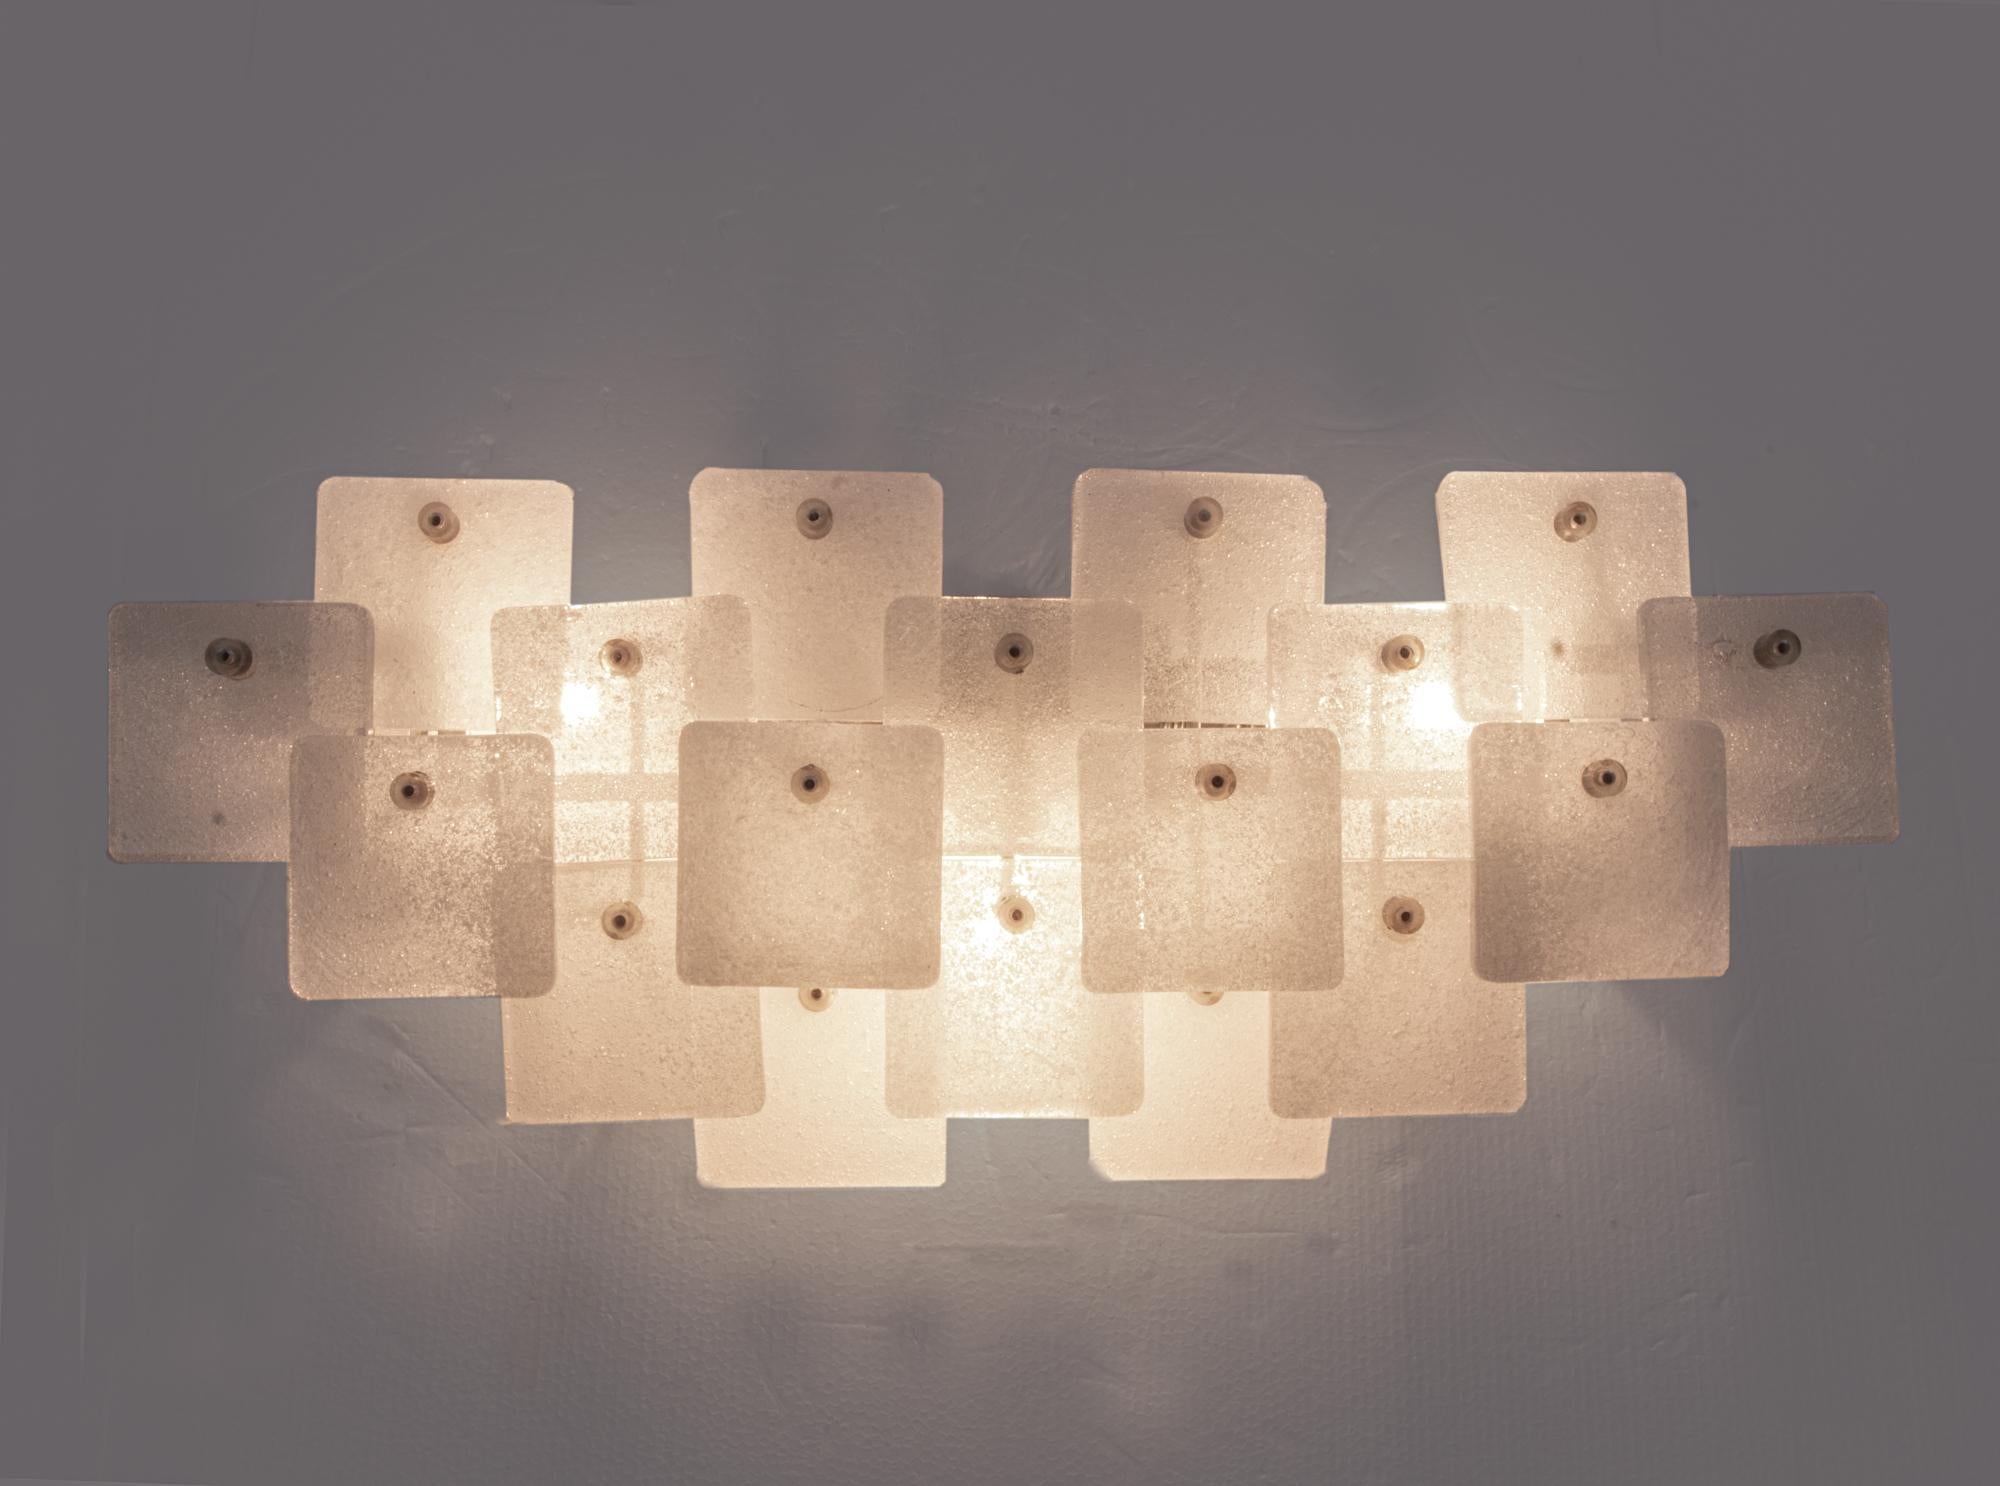 Elegant iced glass wall fixture made of thick foam Murano glass elements mounted on a white laquered nickel frame. The sconce is documented in the Kalmar catalogue from 1970. The eighteen square shaped and foamed Murano glass elements are mounted